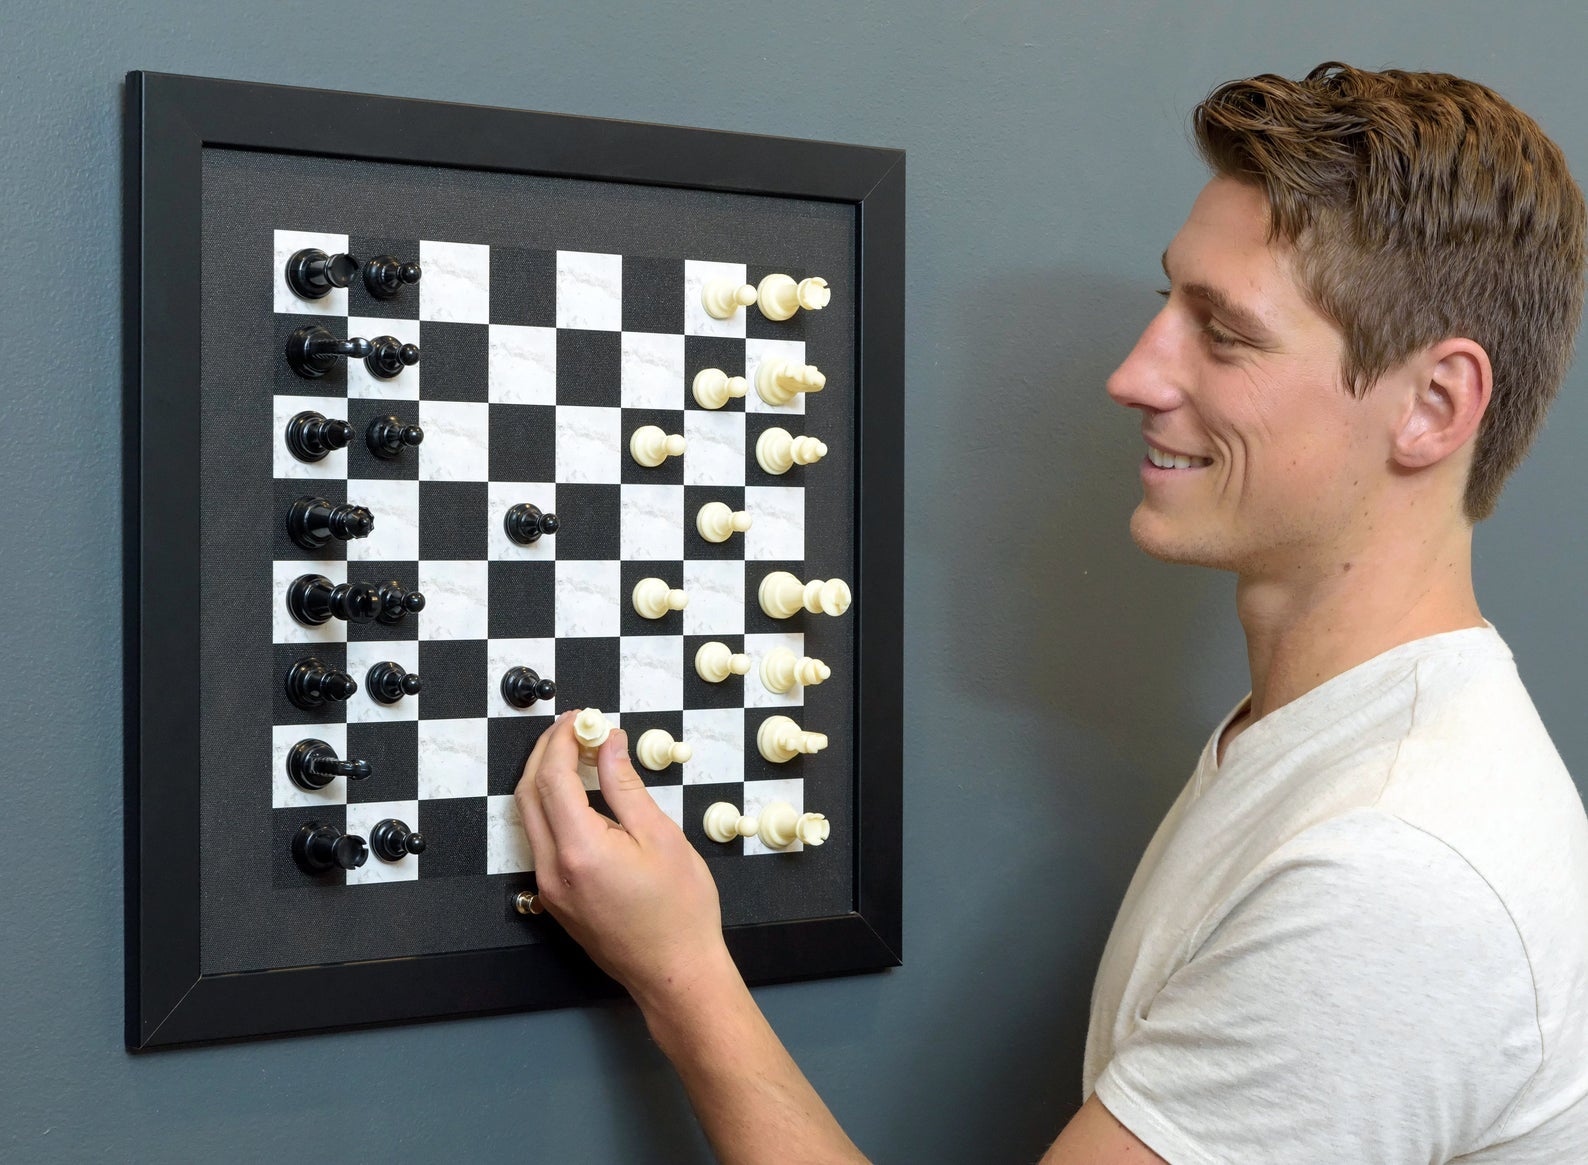 person playing chess with the wall-mounted chess board